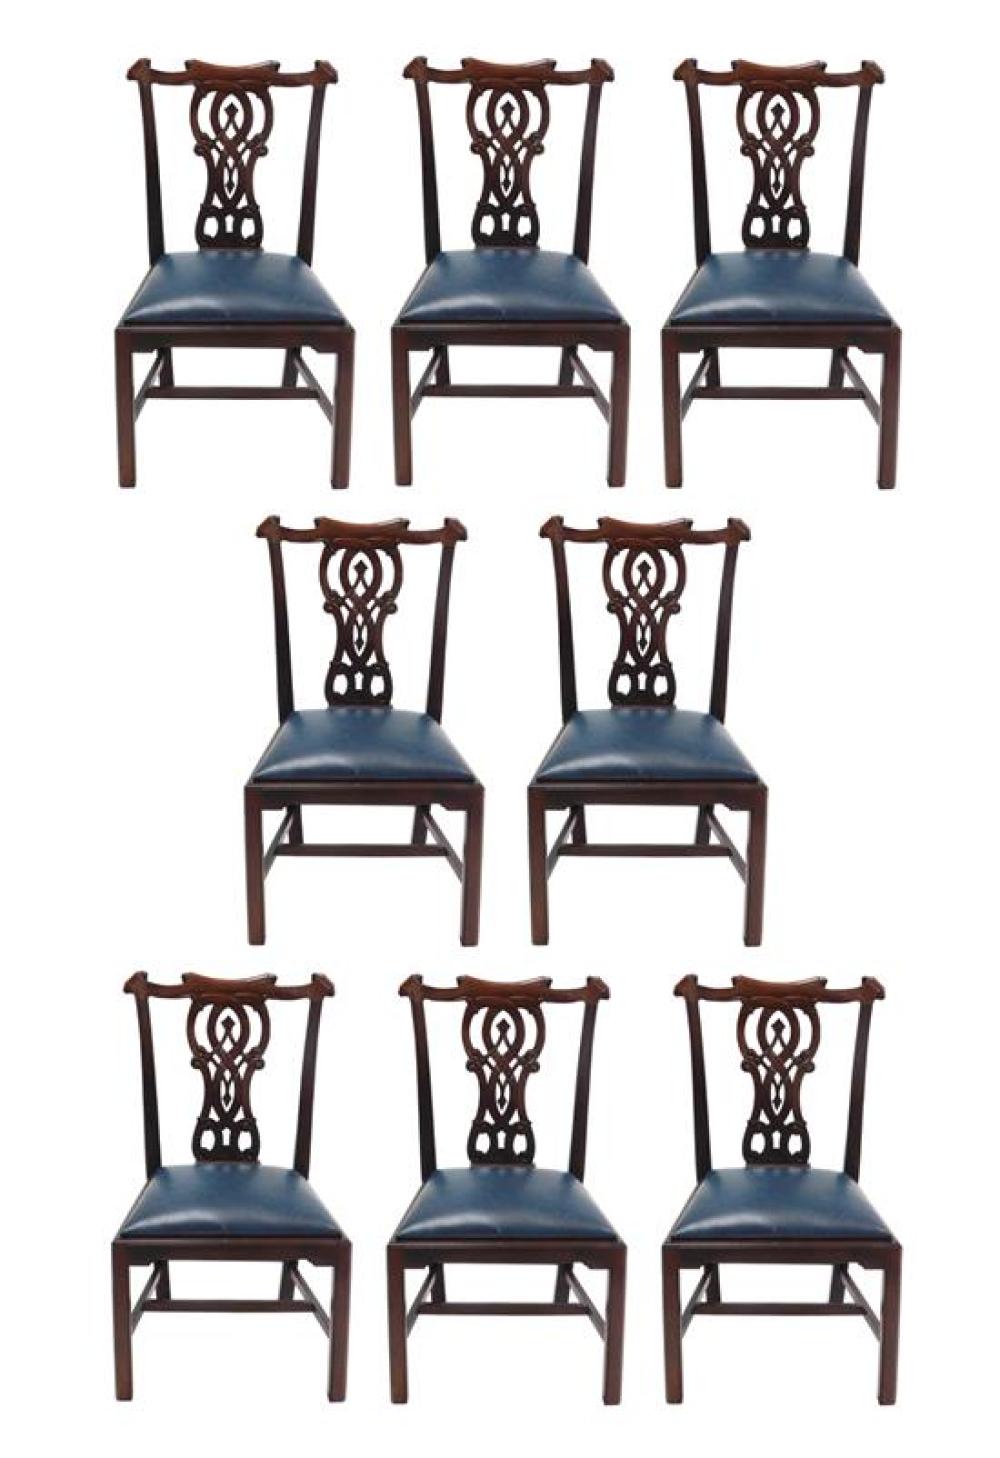 CHIPPENDALE STYLE DINING CHAIRS  31cc99